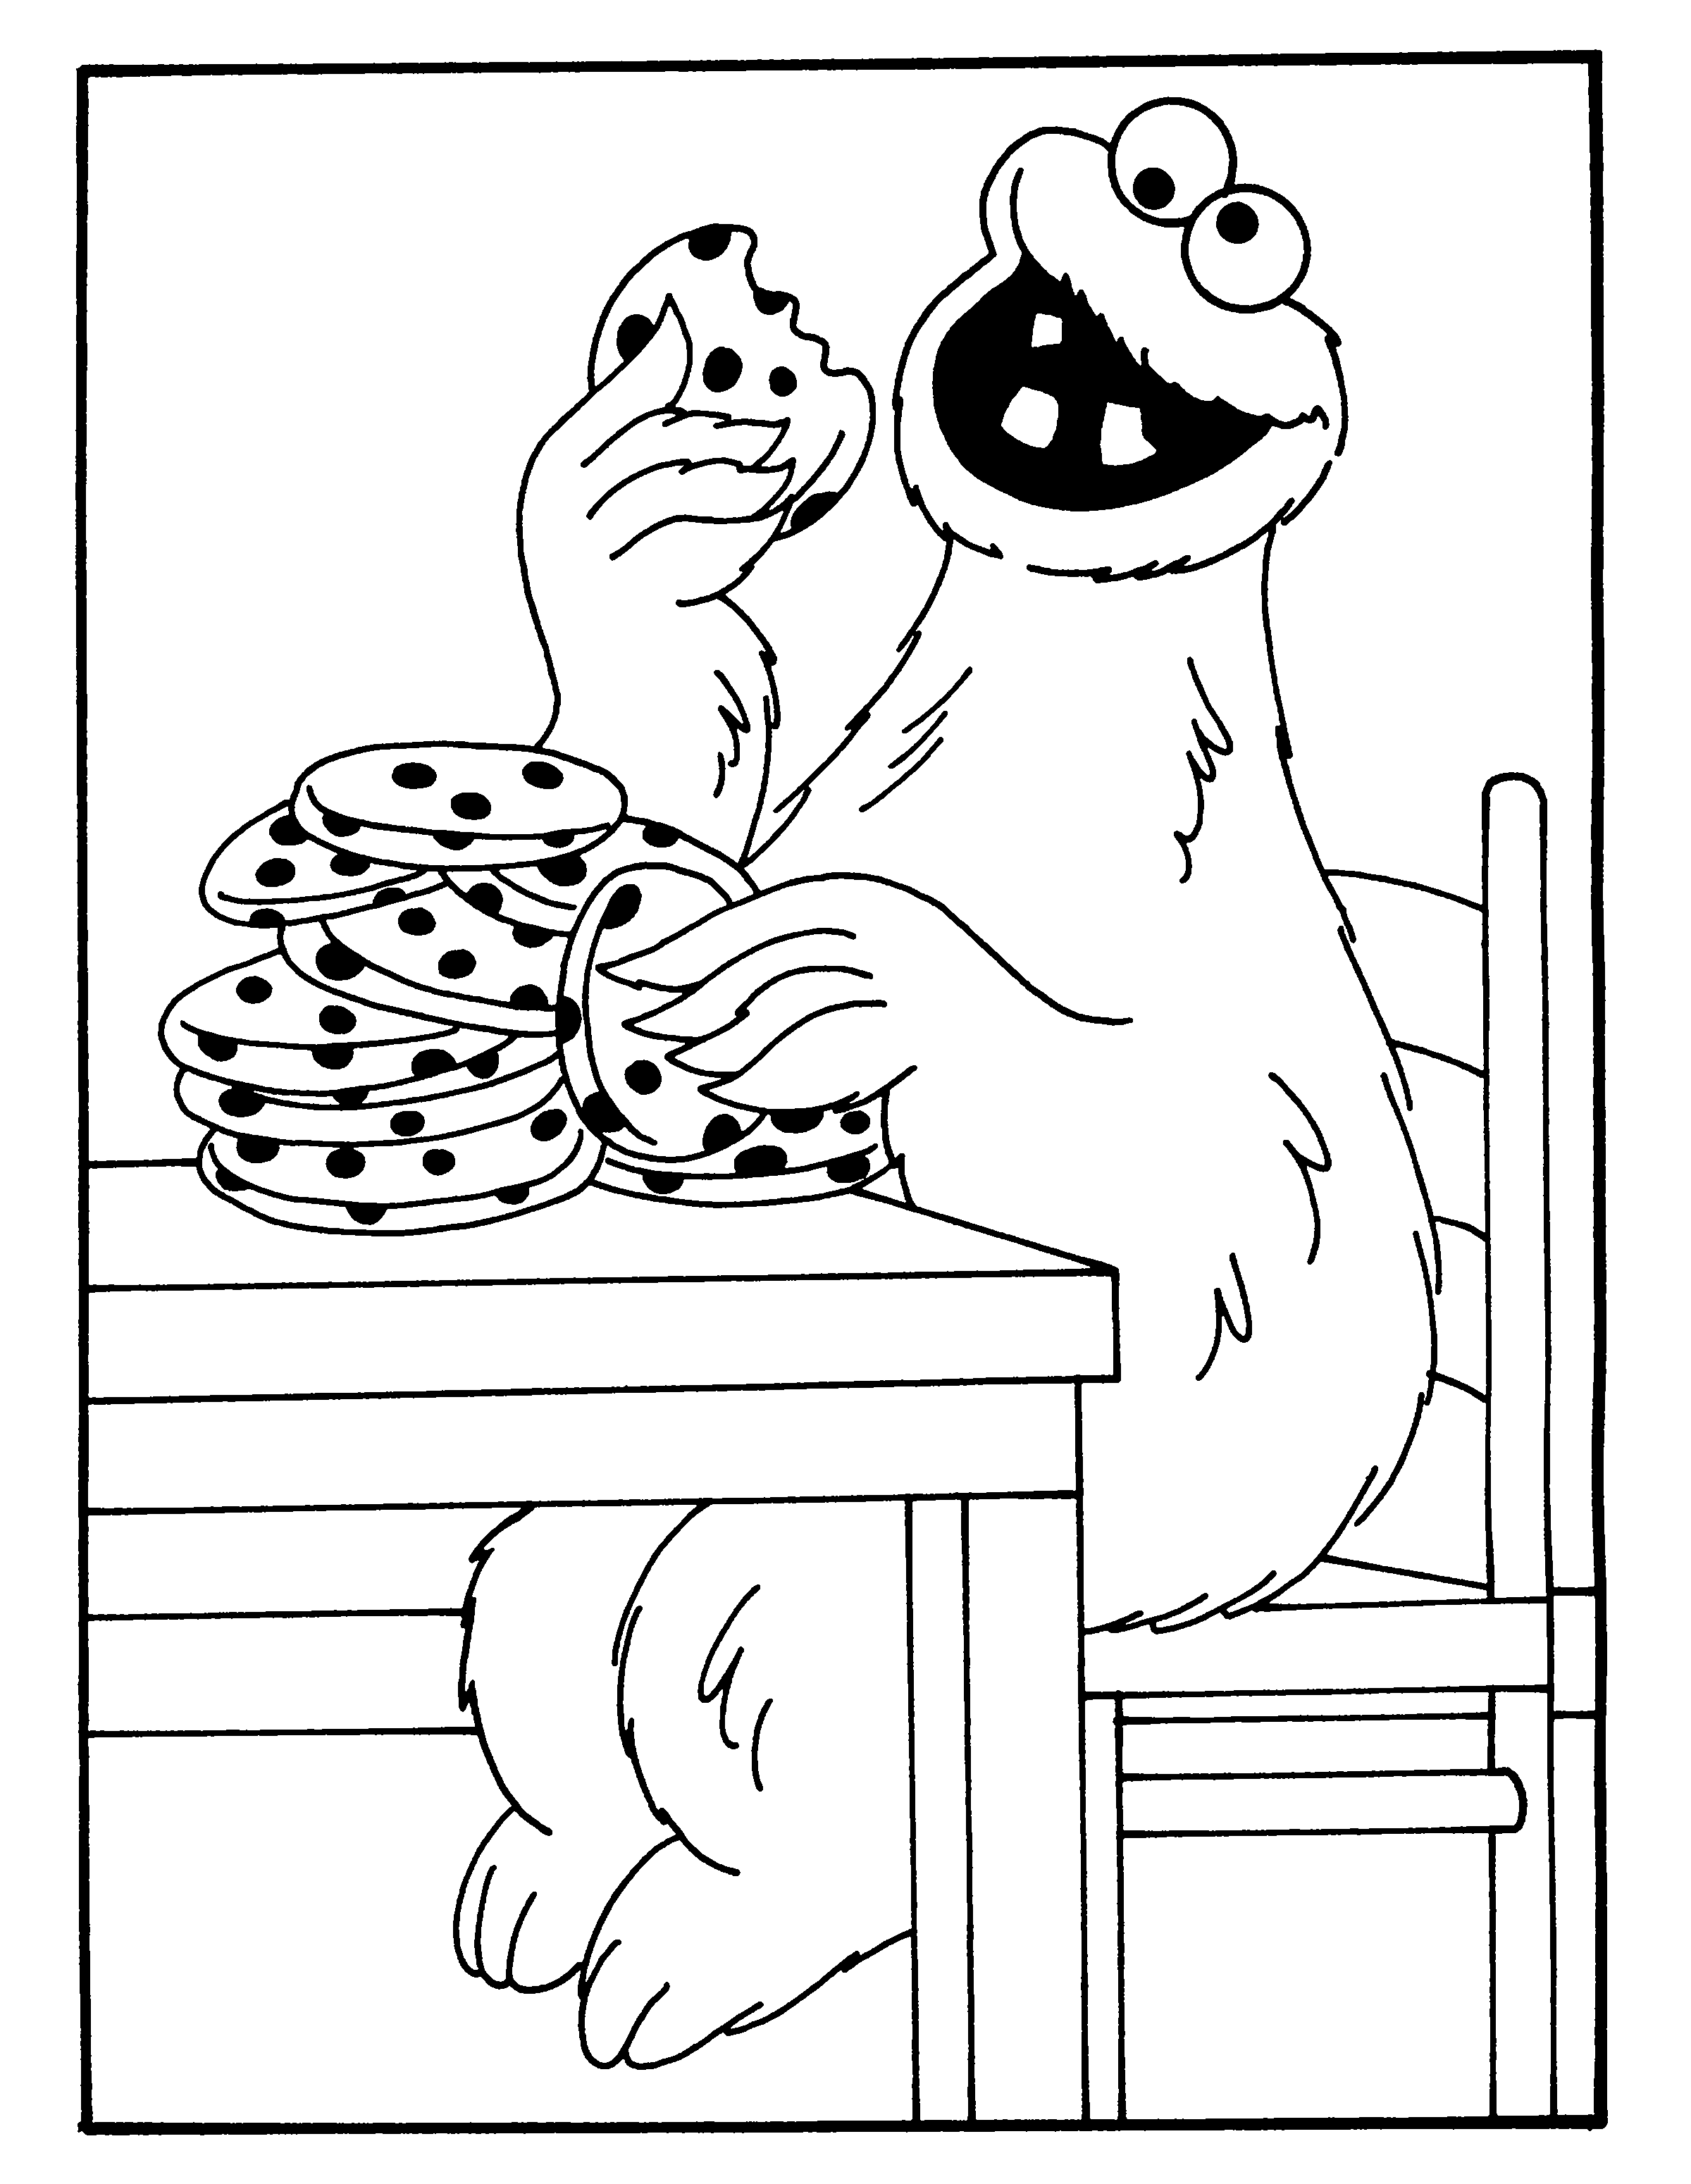 Sesamstraat 01 35 Png 2400 3100 Coloring Pages Coloring Books Cookie Monster Party